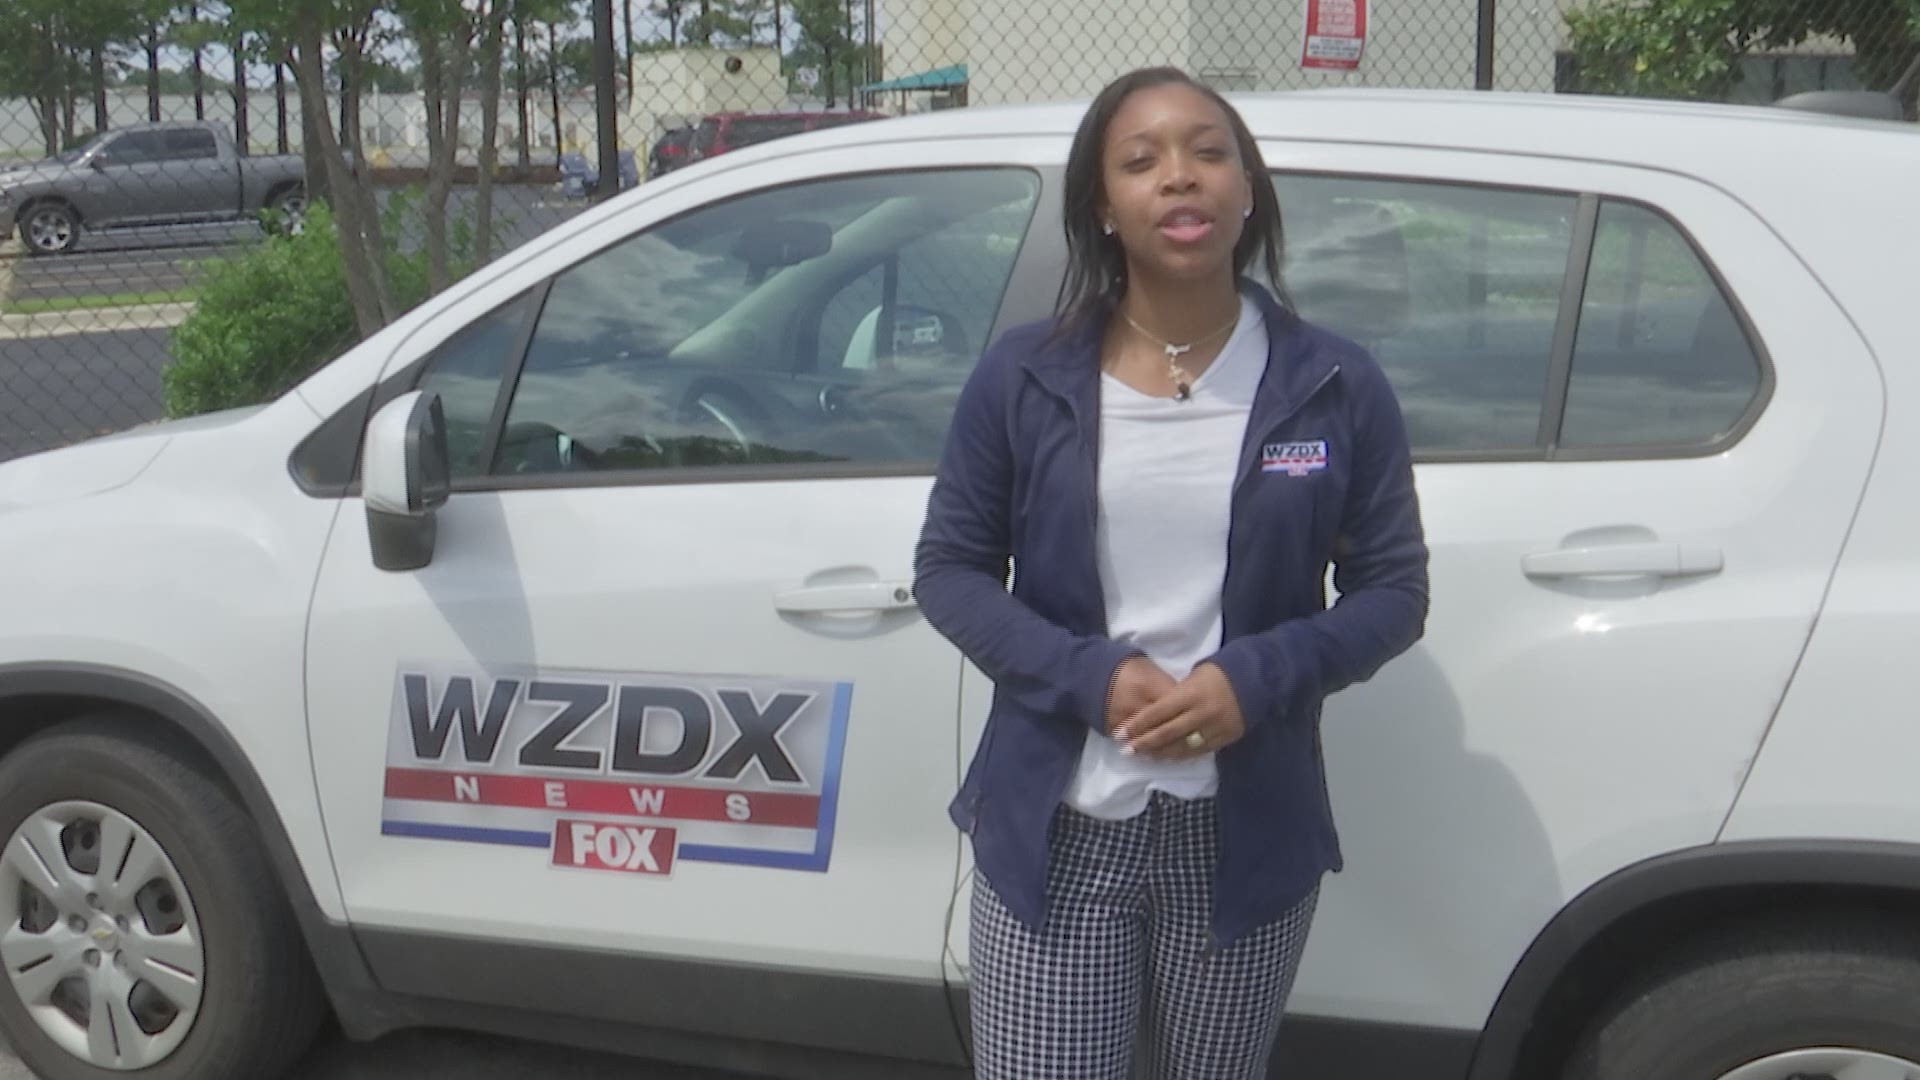 Aiyana Willoughby is a reporter with WZDX Fox 54.